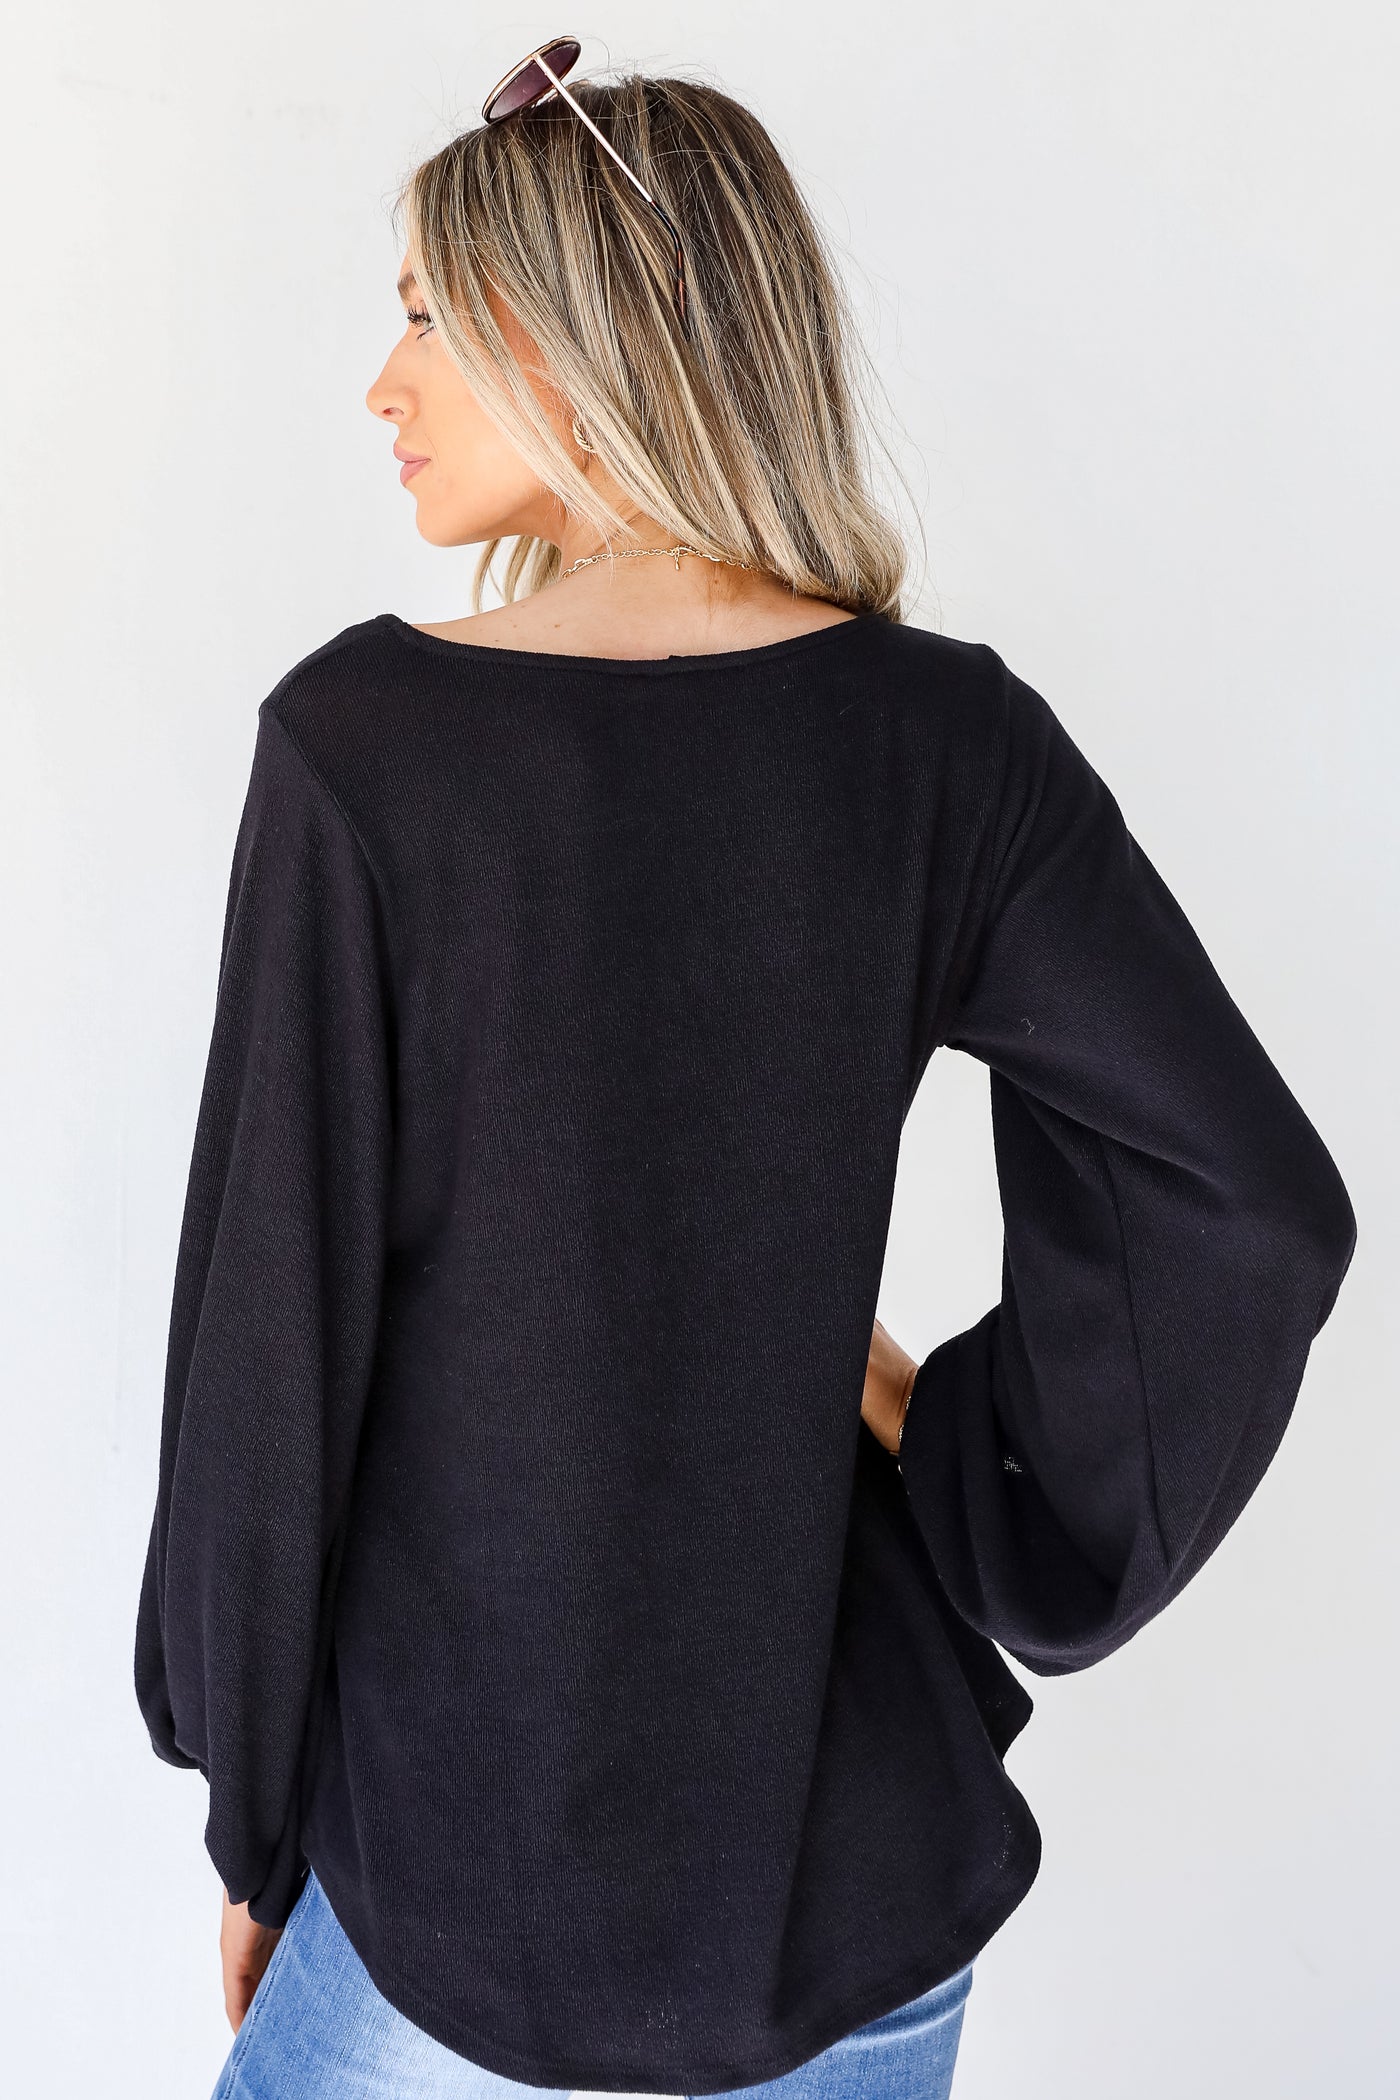 Knit Top in black back view